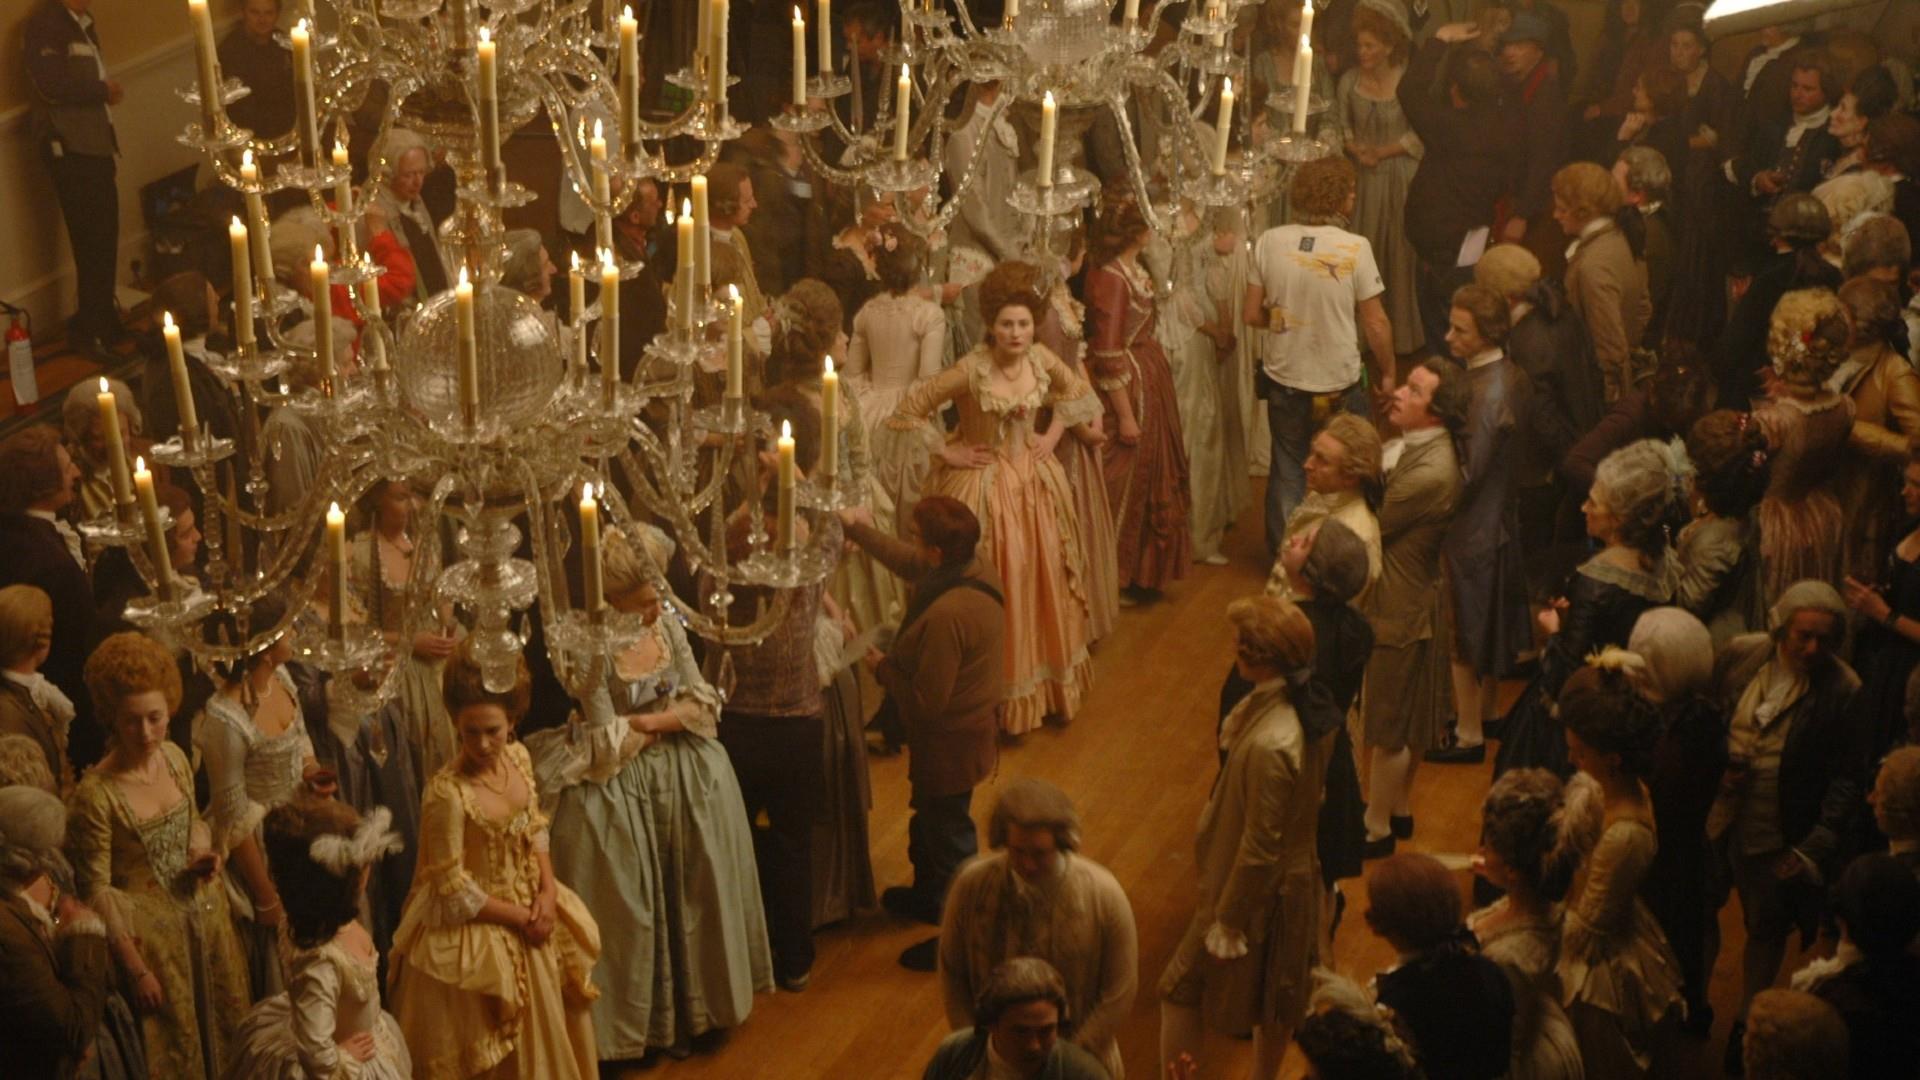 A scene from the movie, The Duchess